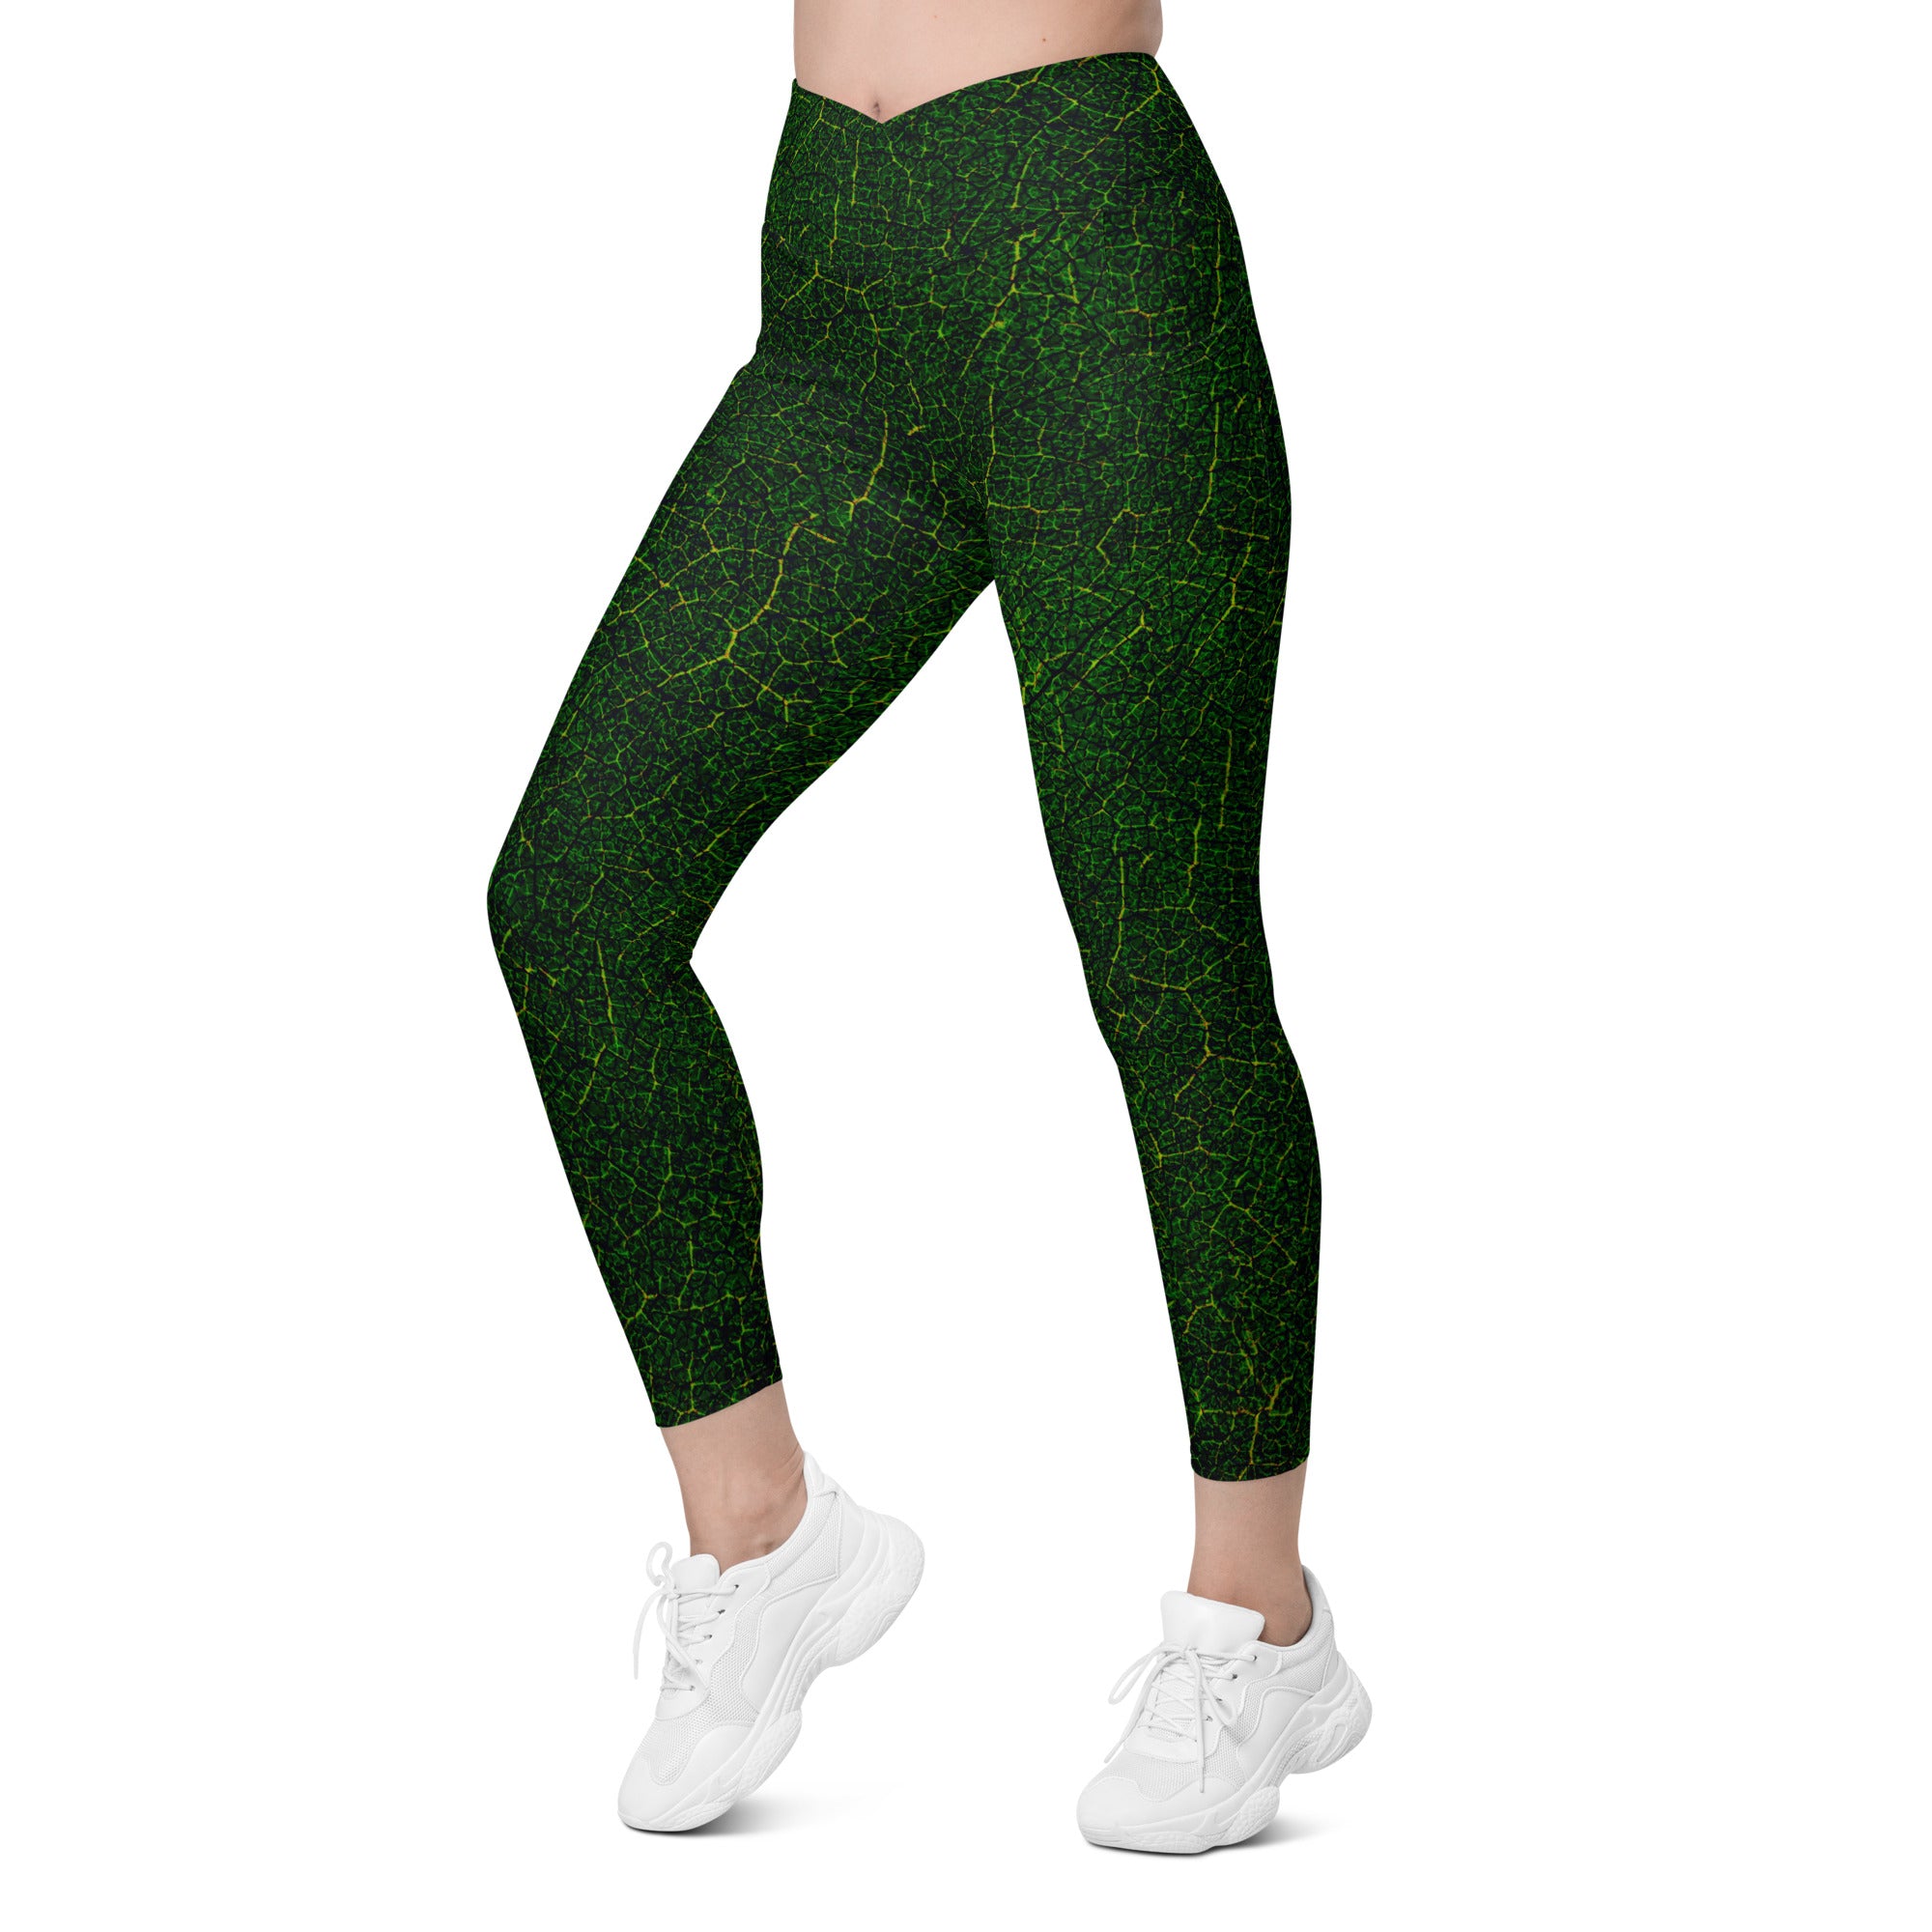 Botanical Bliss Crossover Leggings styled for a comfortable home workout, demonstrating their adaptability and supportive design.